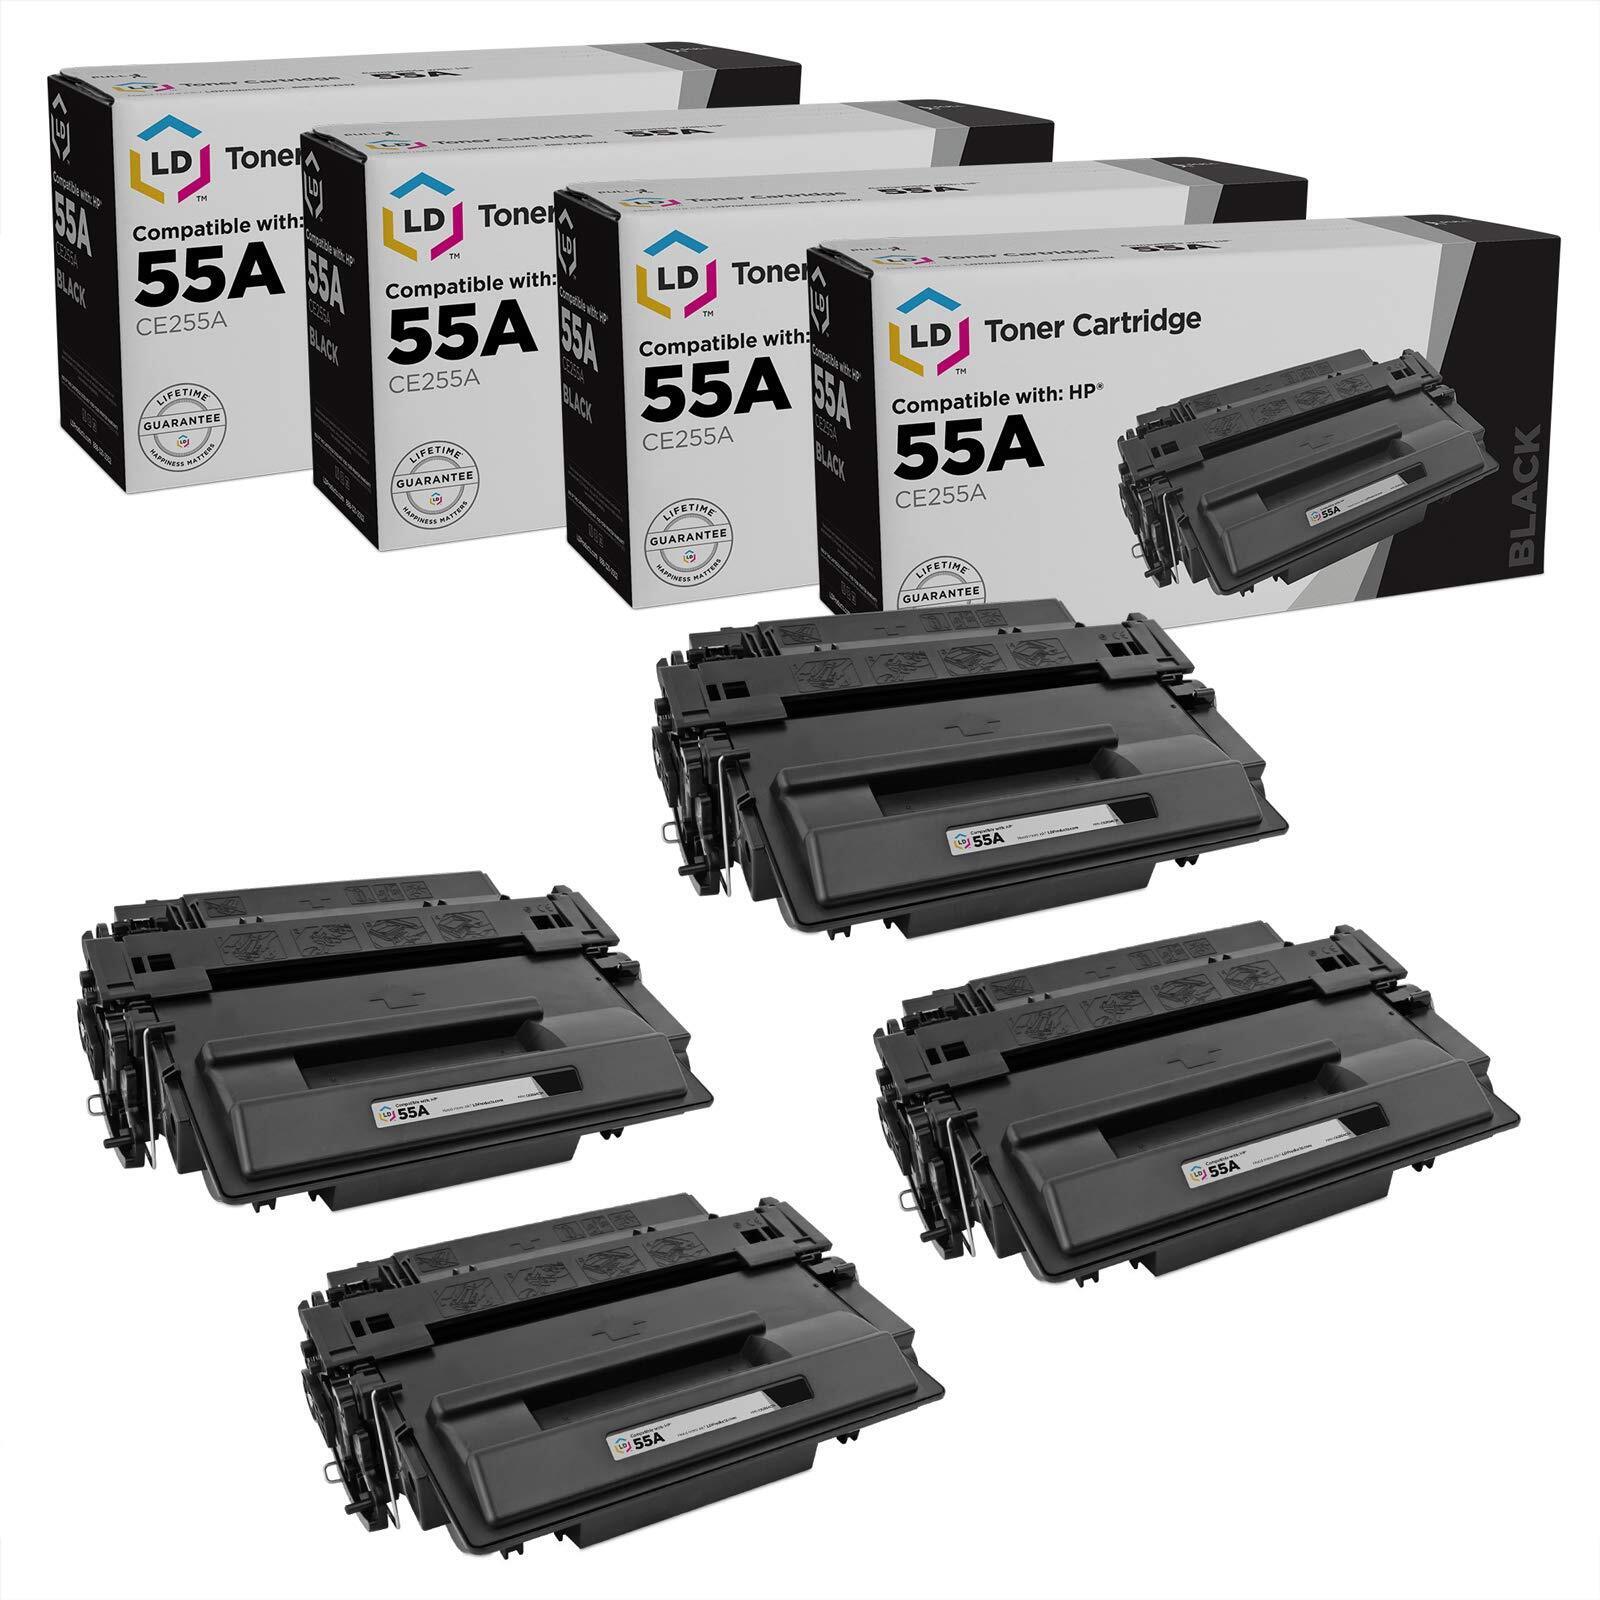 LD Products Replacements for HP 55A 55 CE255A CE255 Toner Cartridge (4PK)